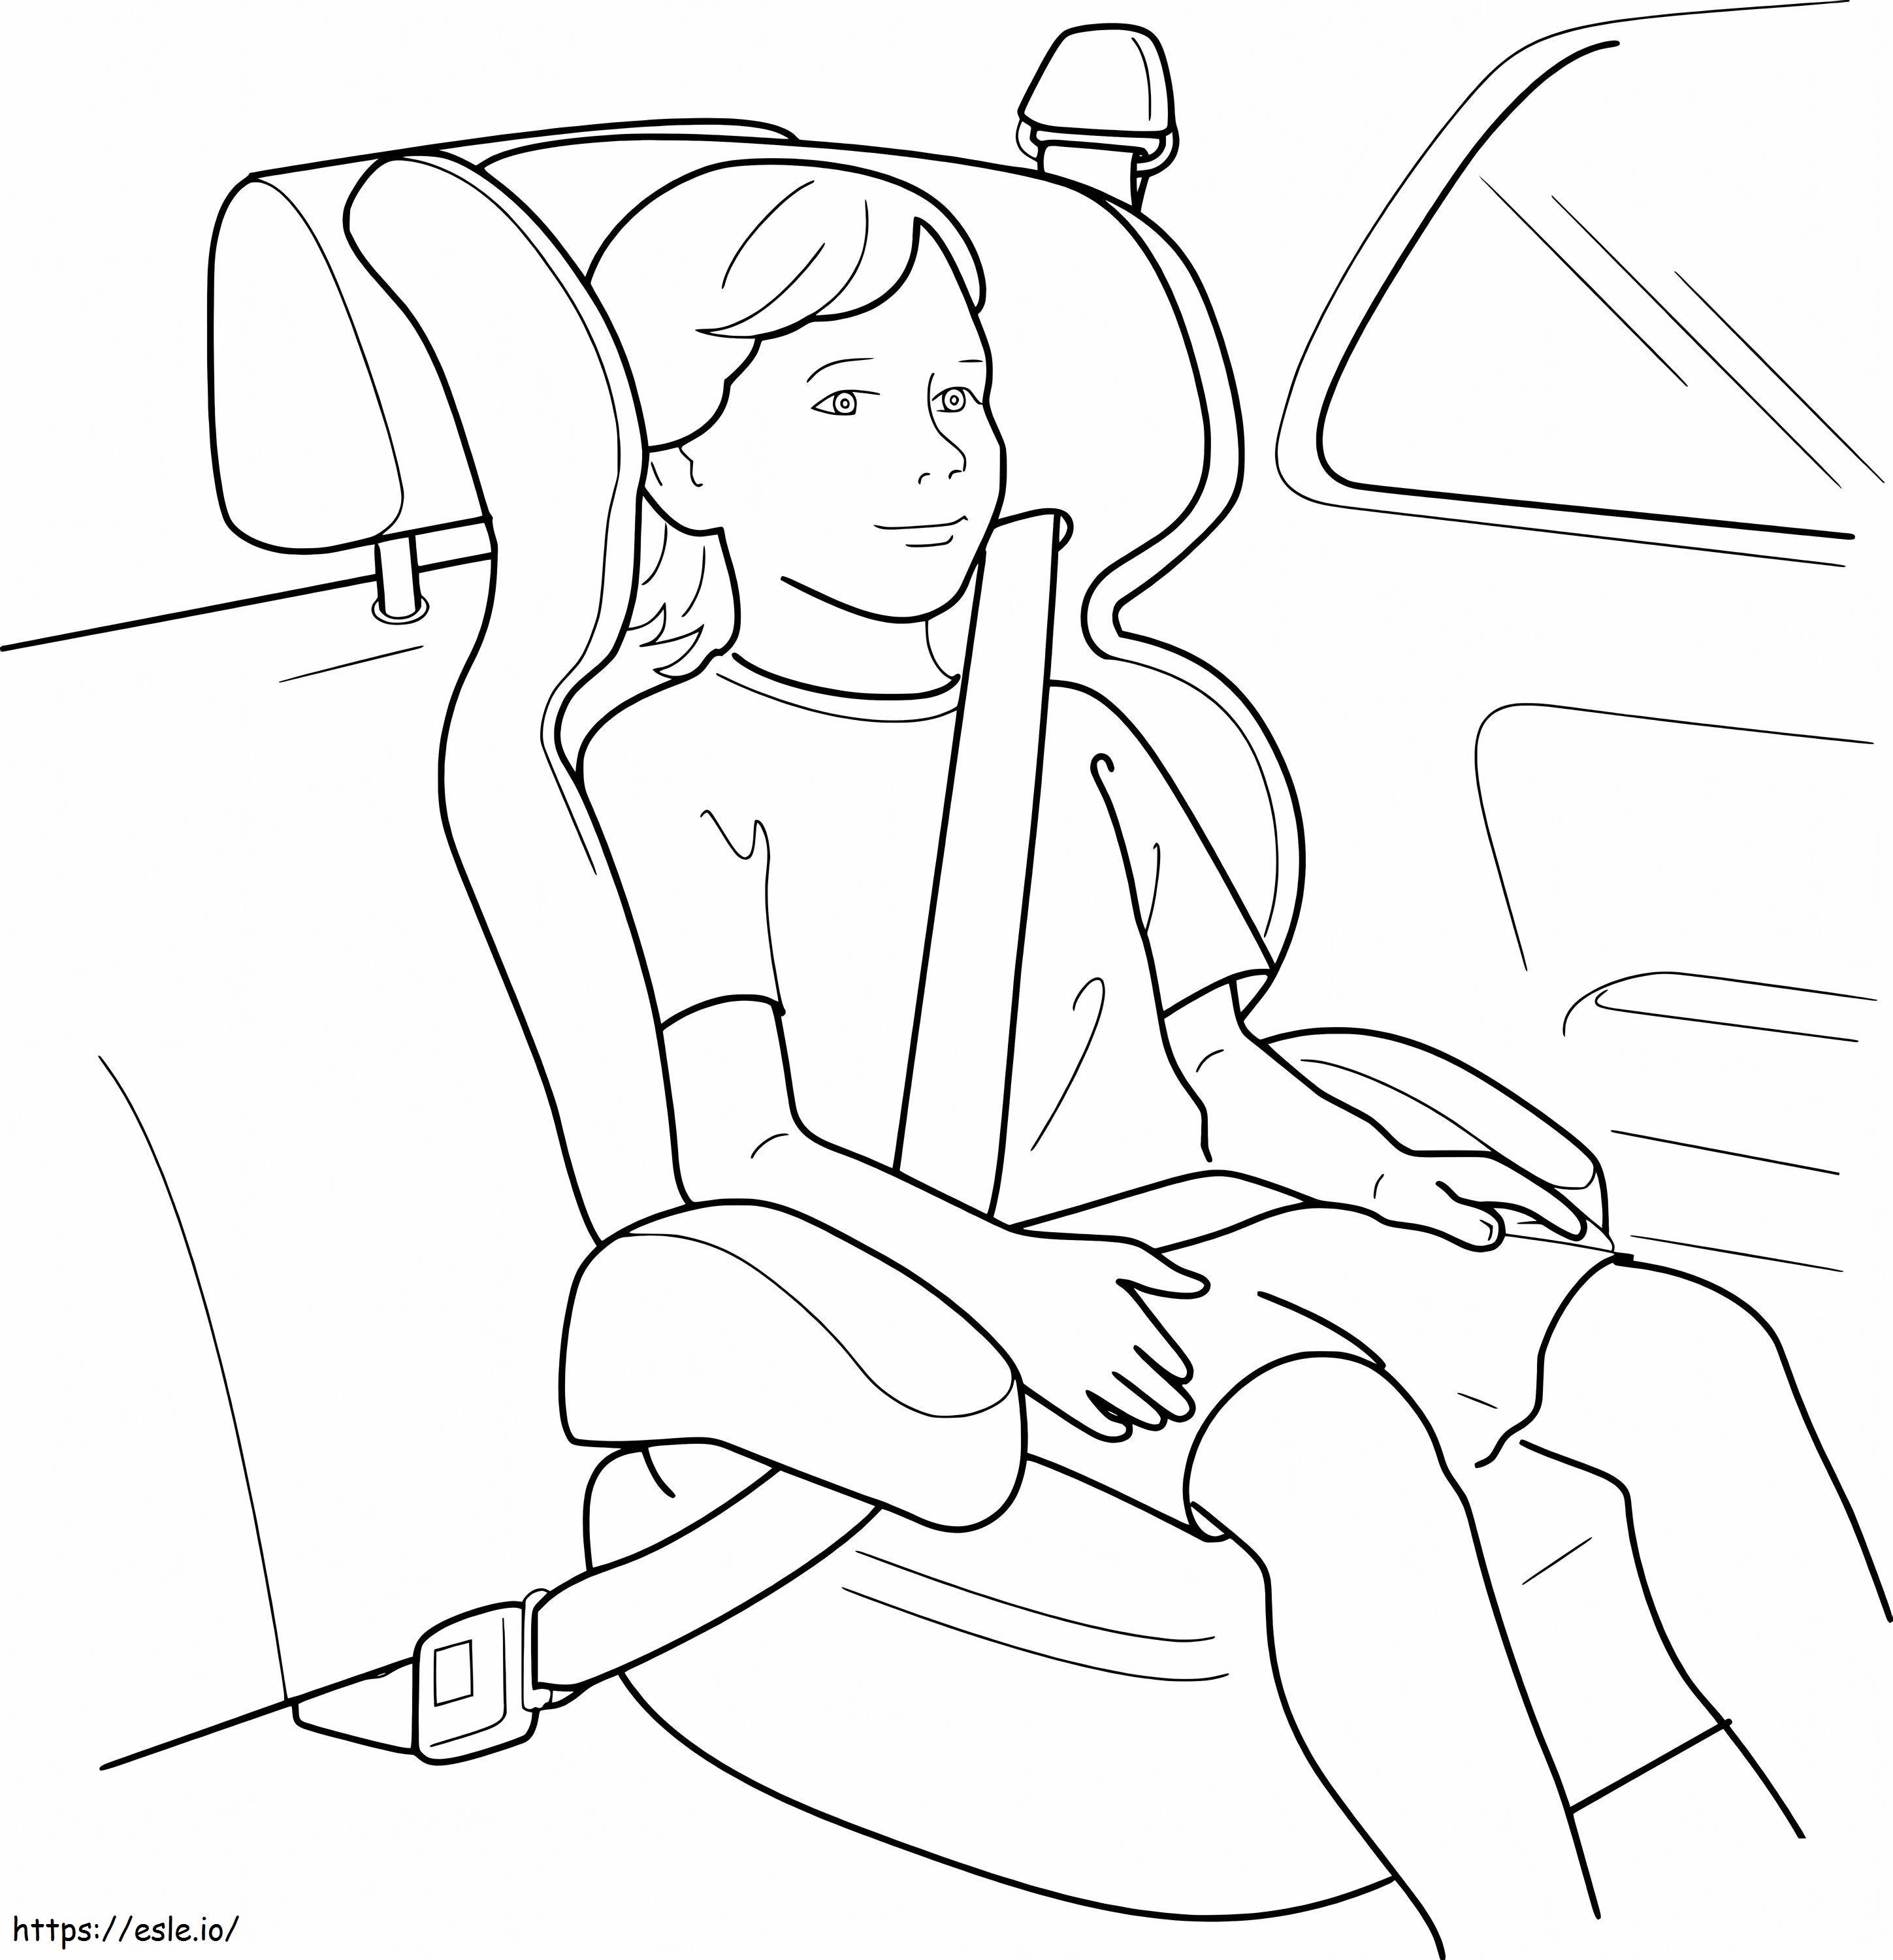 Fasten The Seat Belt For Child Car Safety coloring page